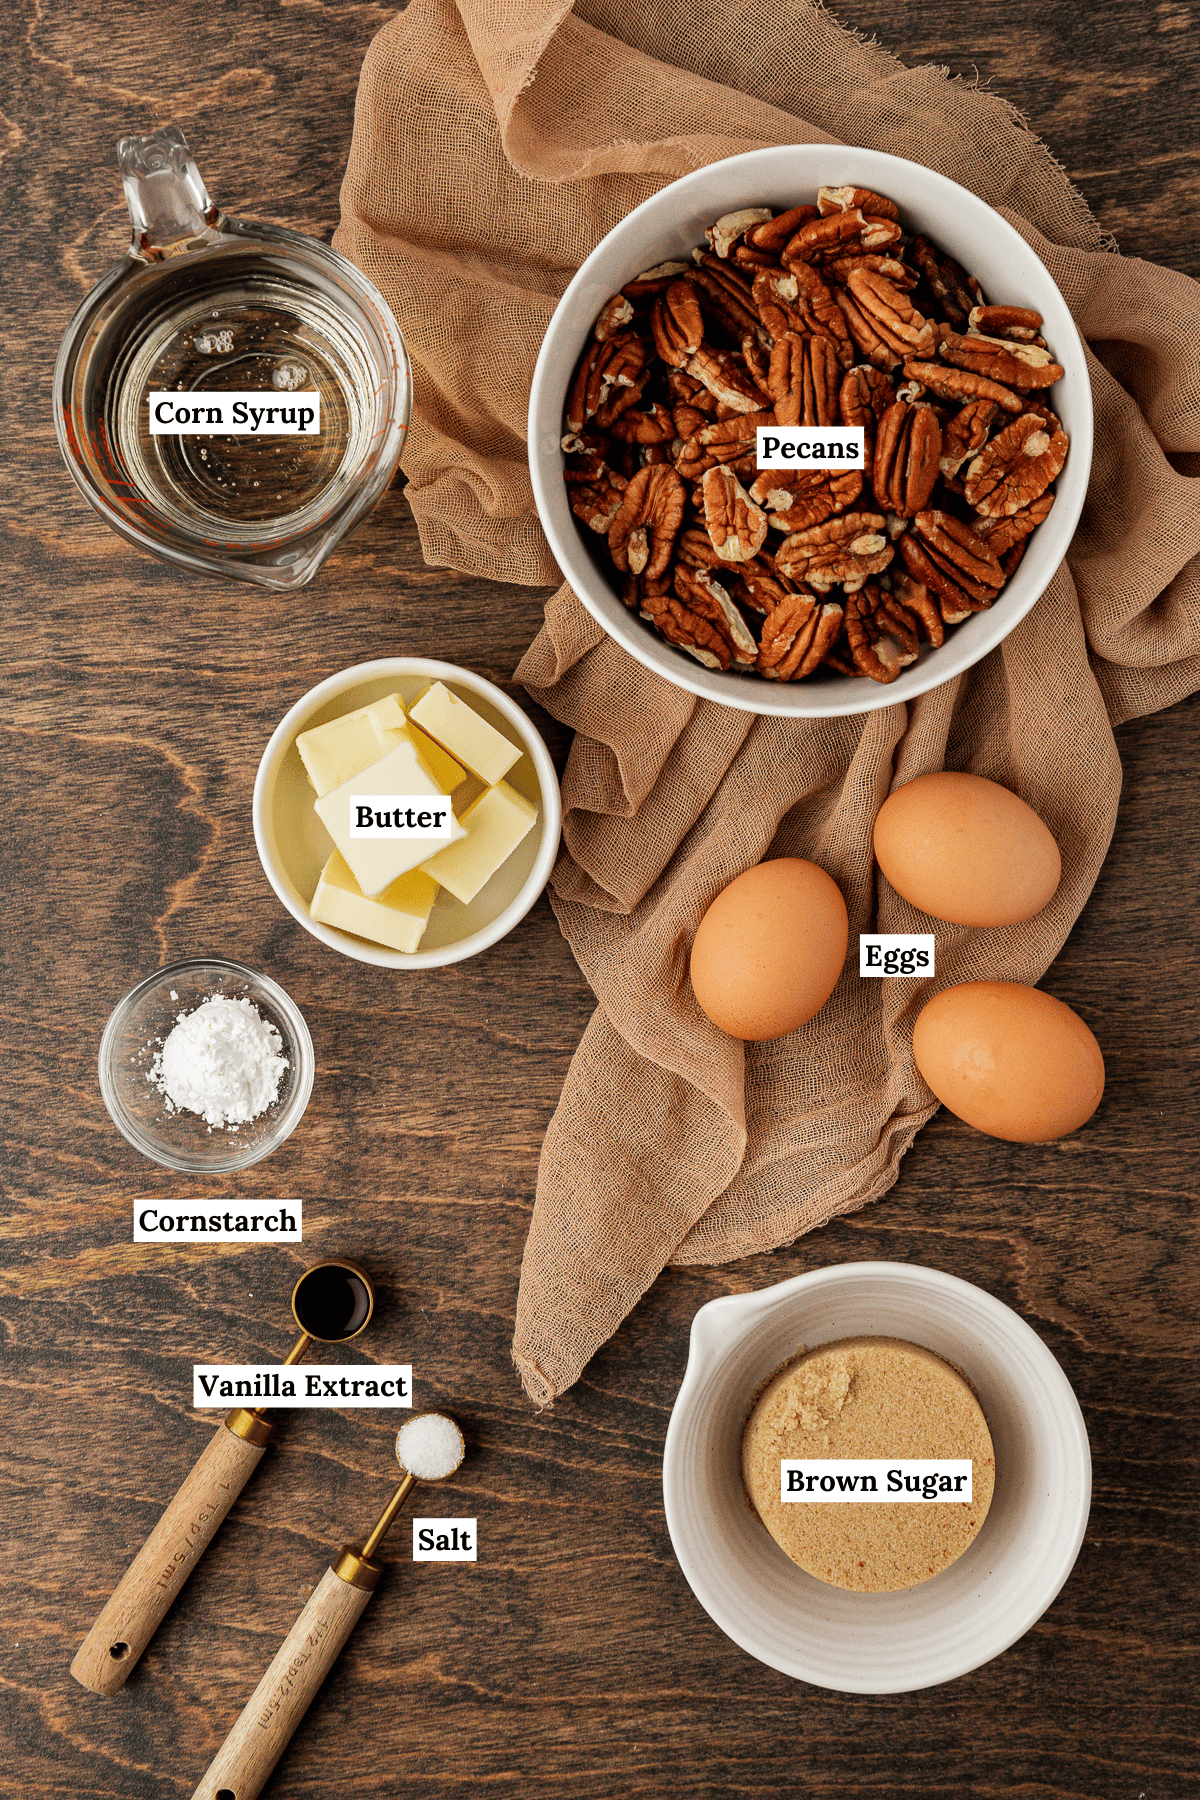 ingredients for pecan pie arranged on a wood surface with a tan towel including corn syrup, pecans, butter, eggs, corn starch, vanilla extract, salt and brown sugar